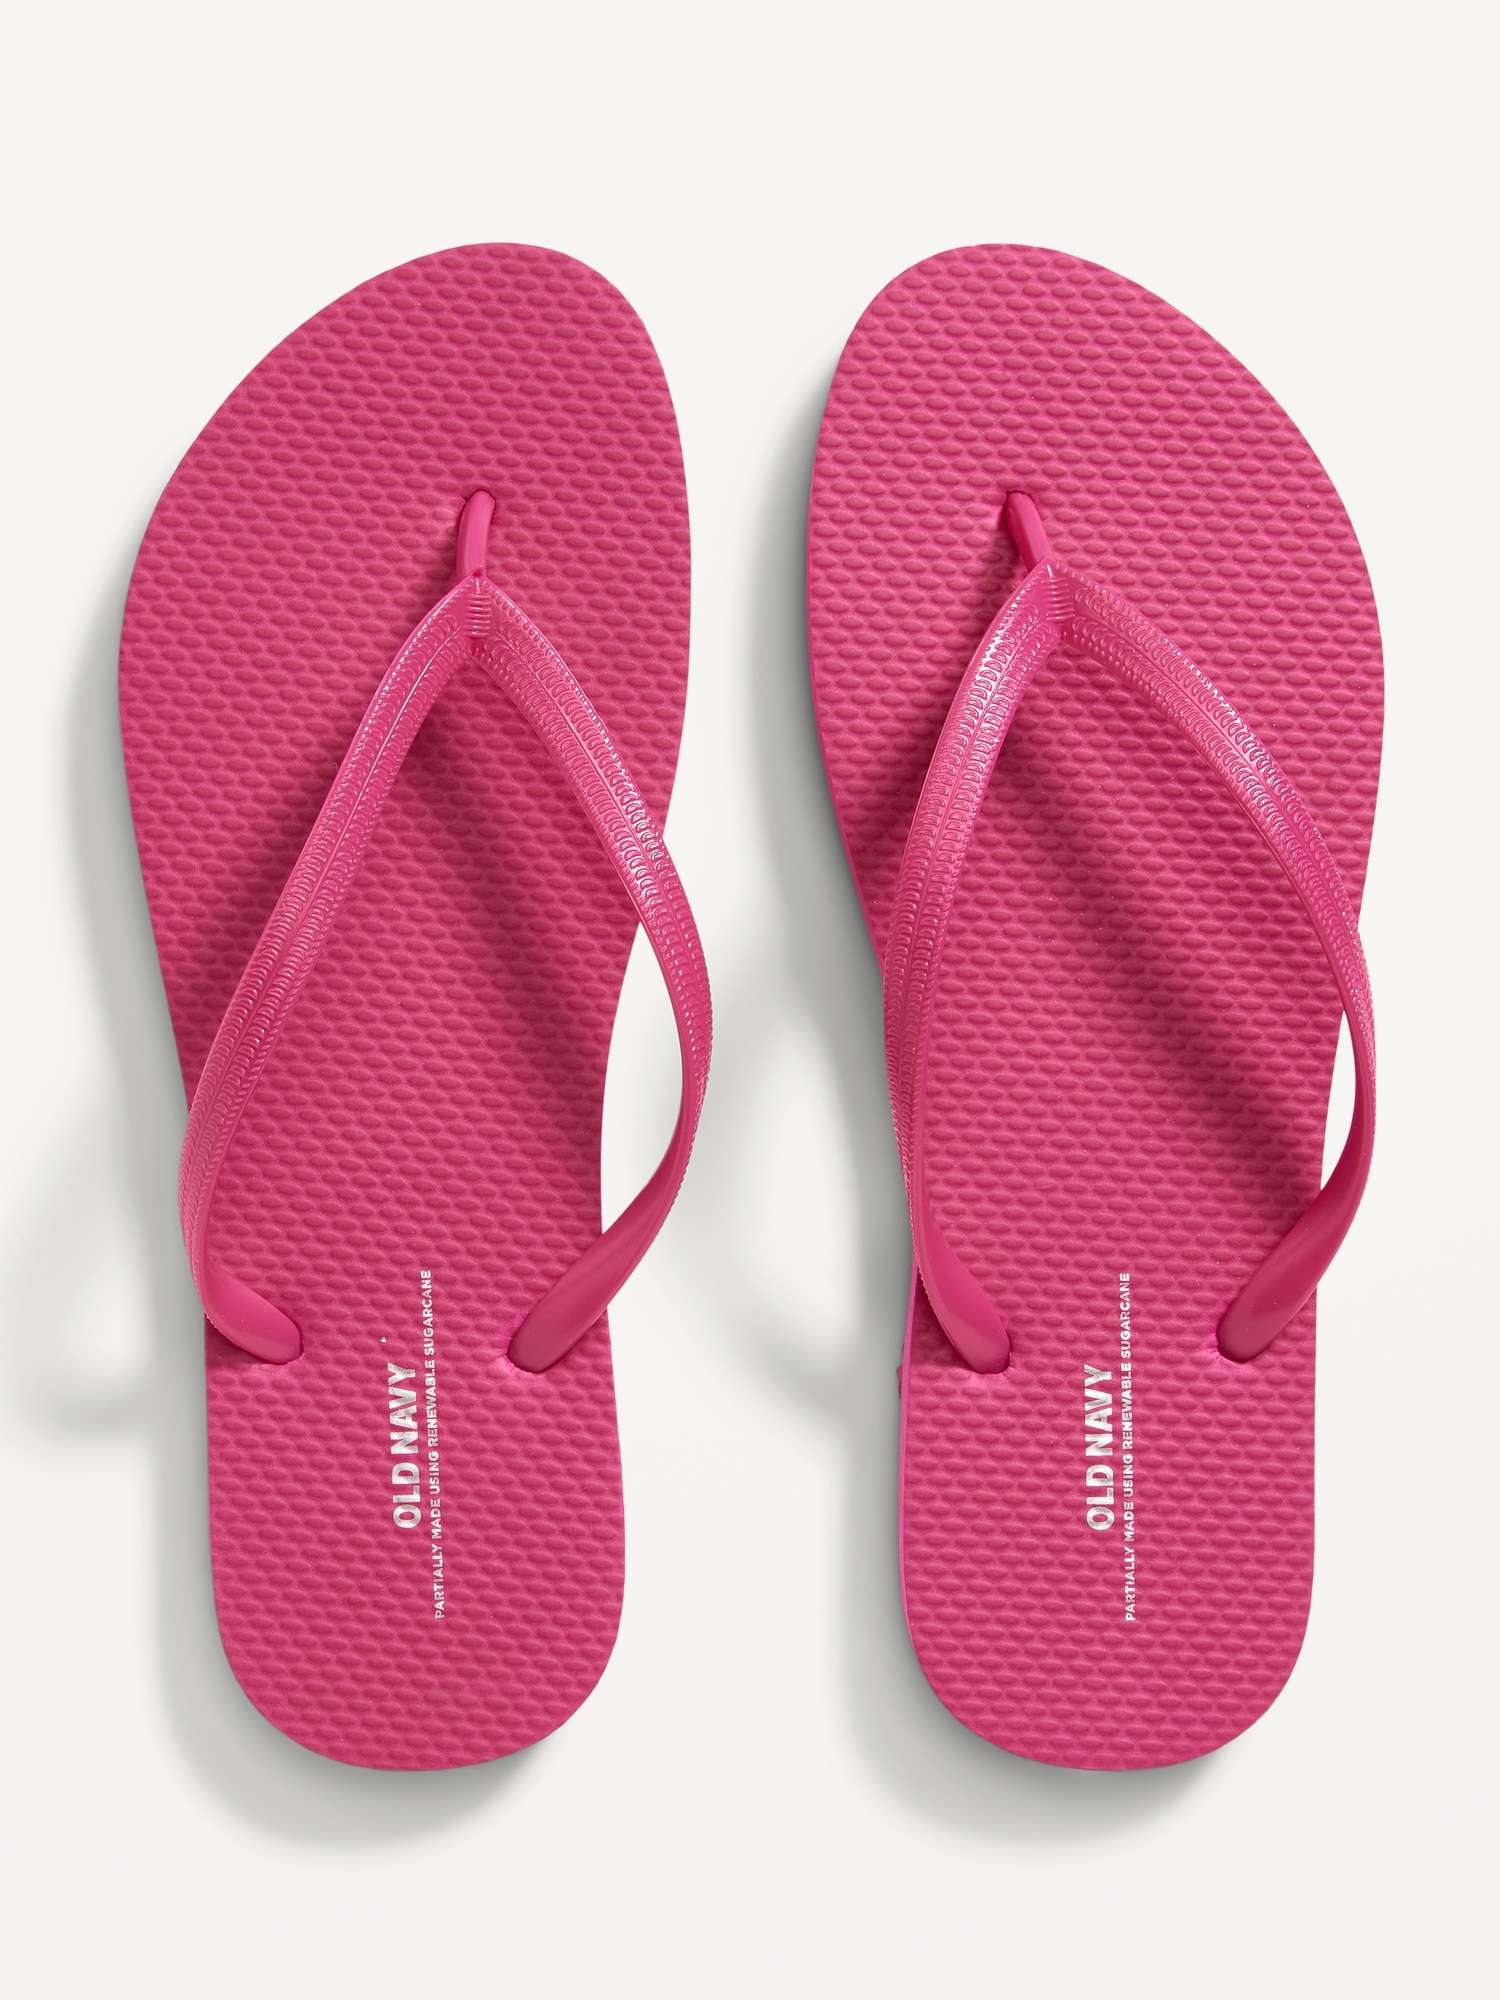 FlipFlop Sandals for Women (Partially PlantBased) Old Navy